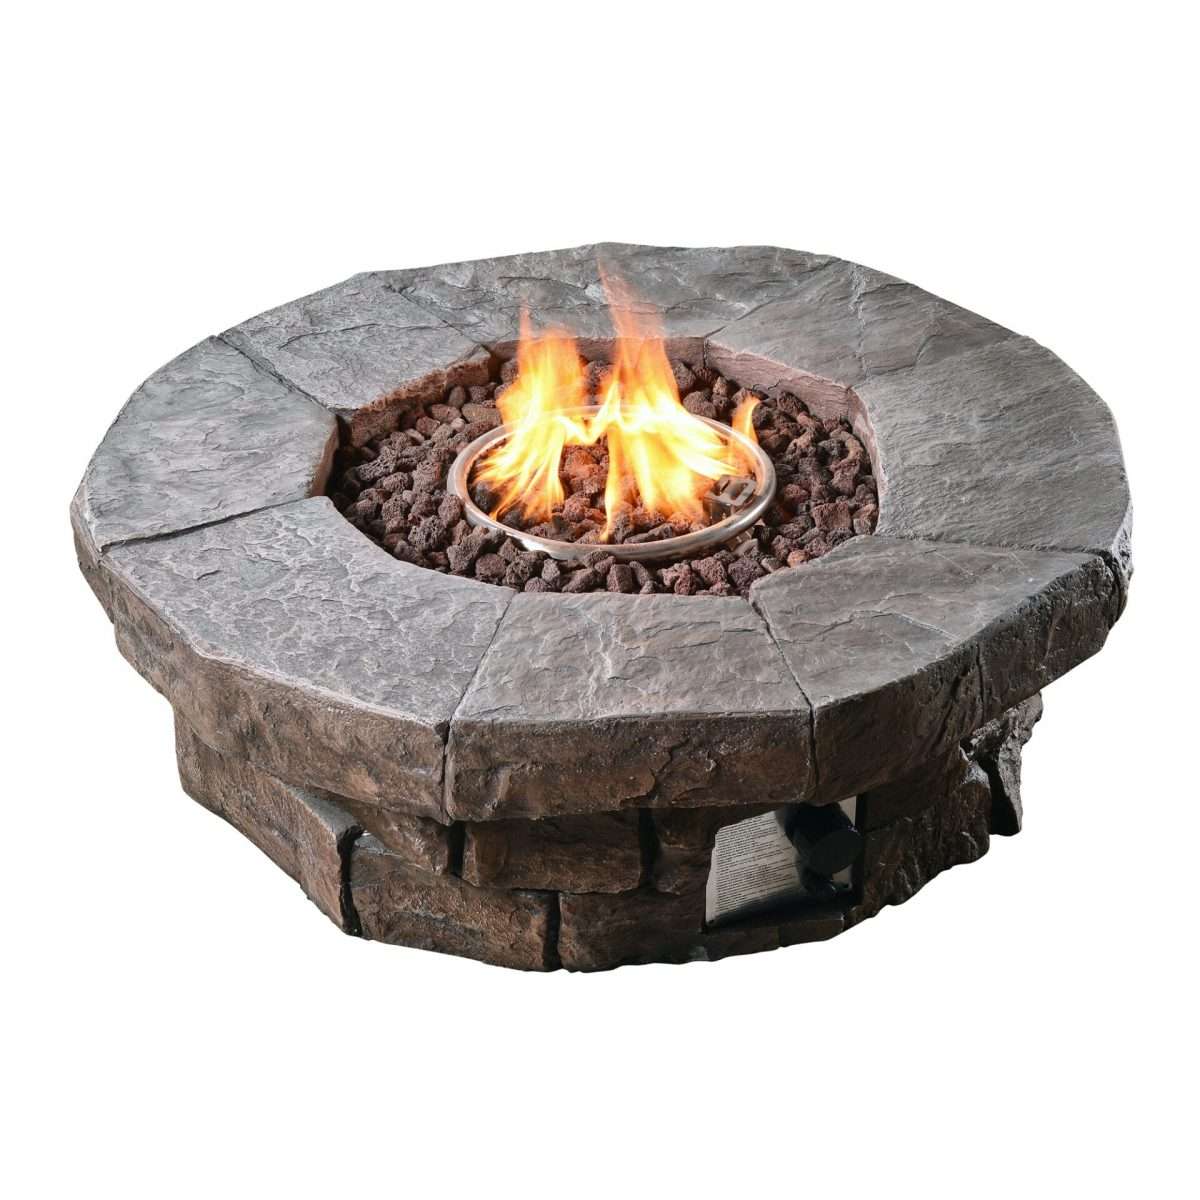 Large Round Stone Effect Gas Fire Pit Burner